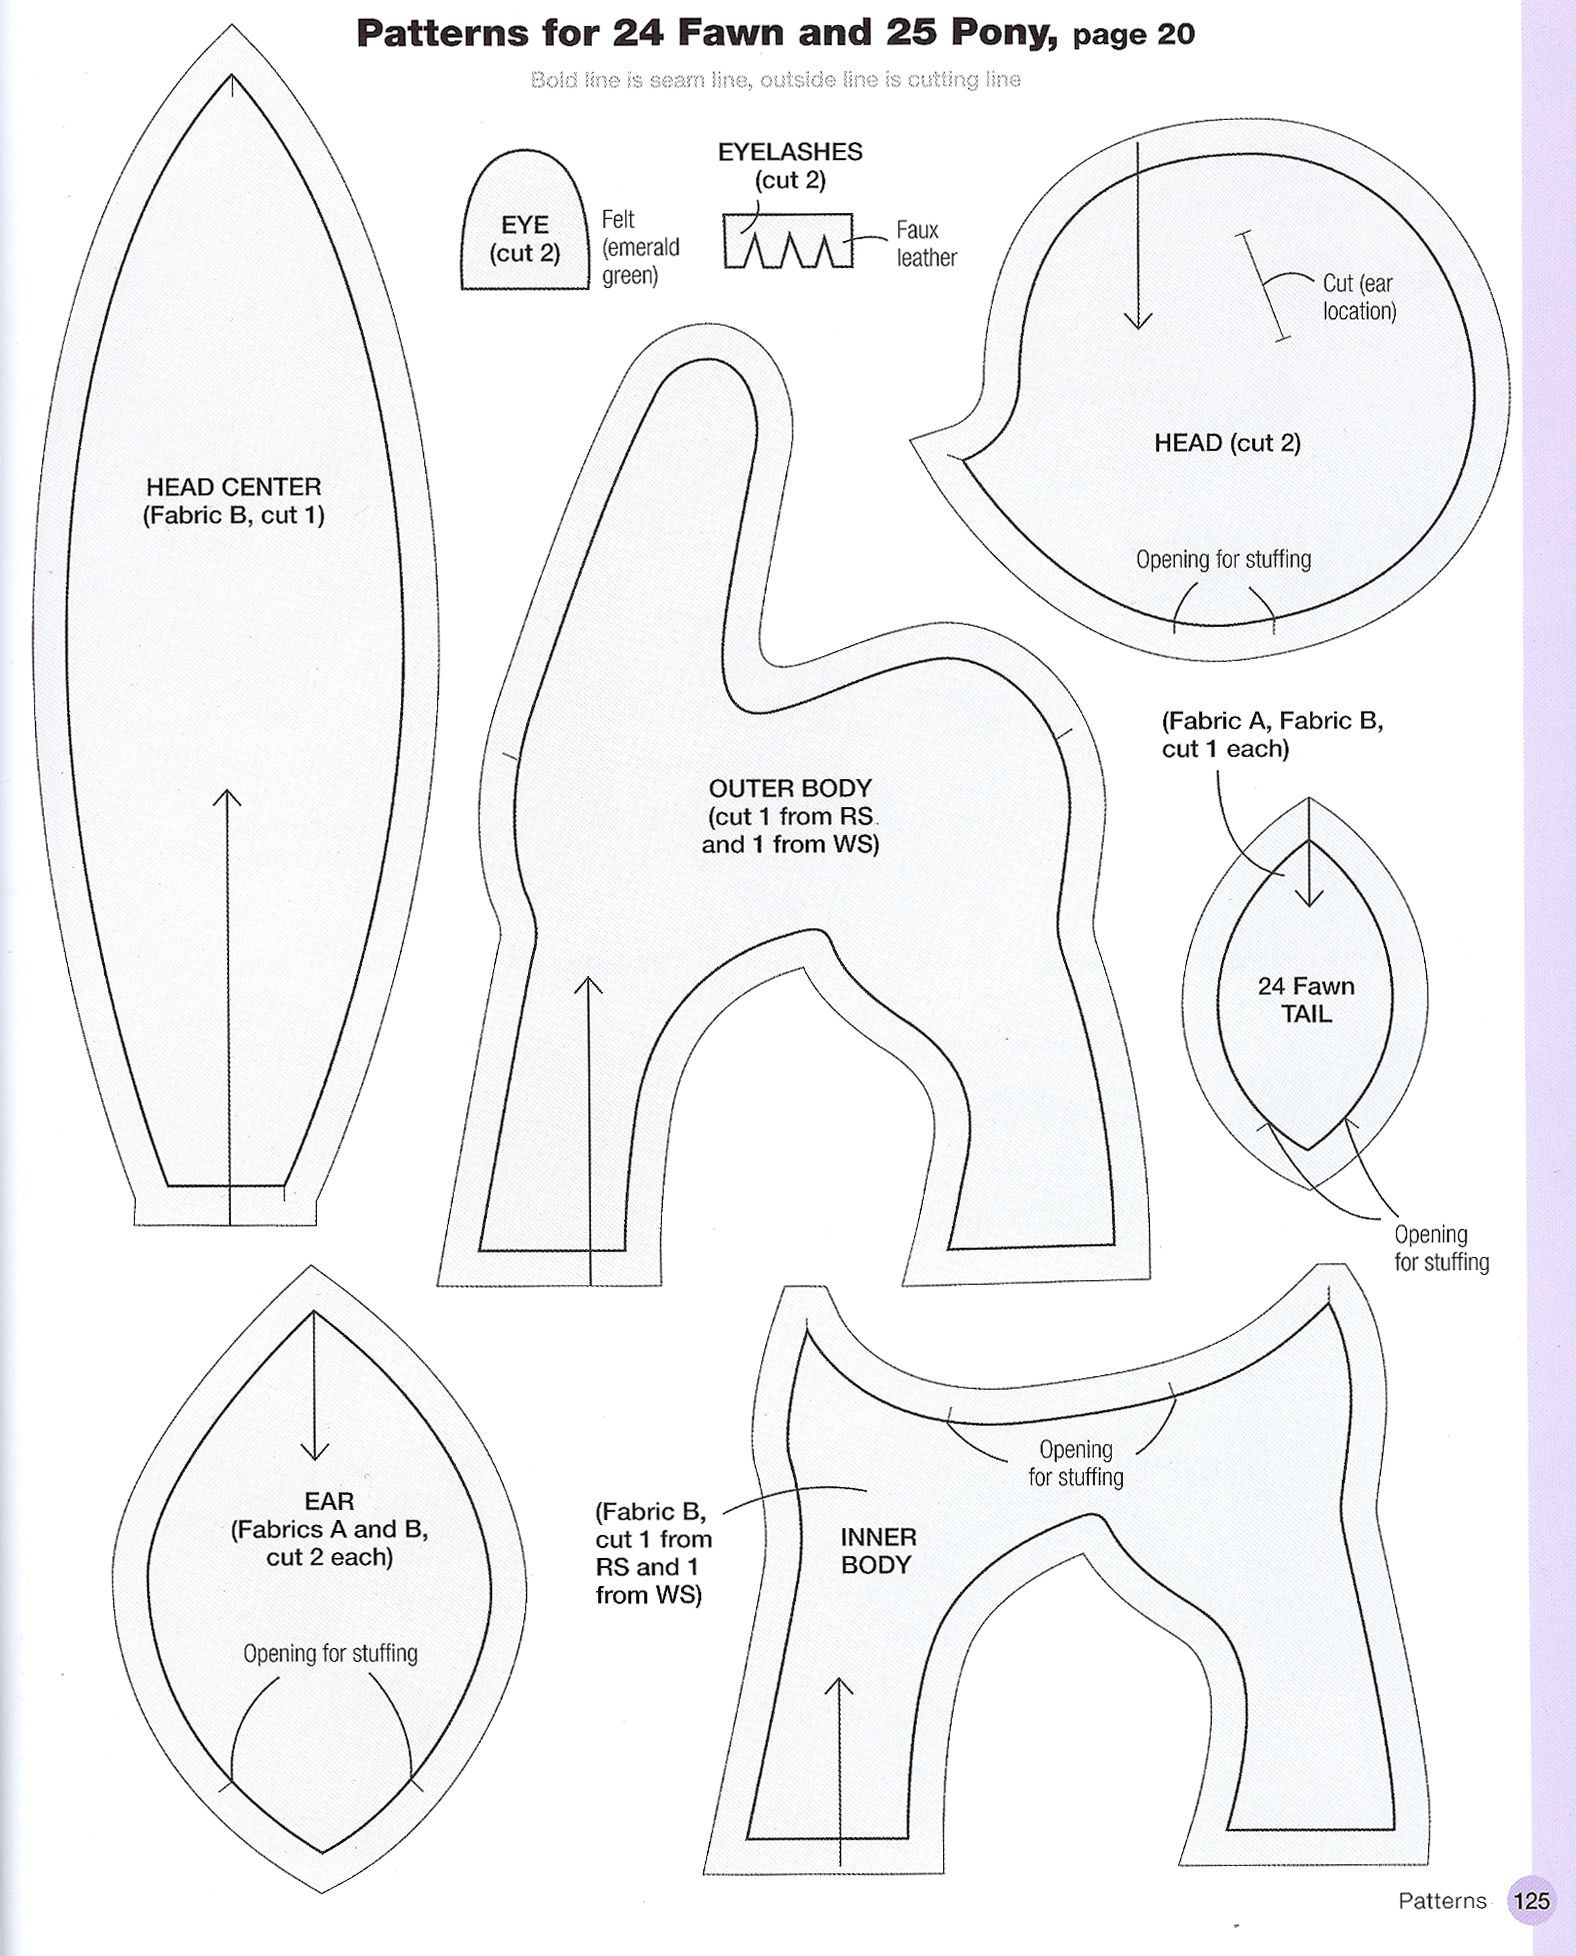 My Little Pony Patterns for Fan Art Diy Projects, My Little Pony Sewing Template